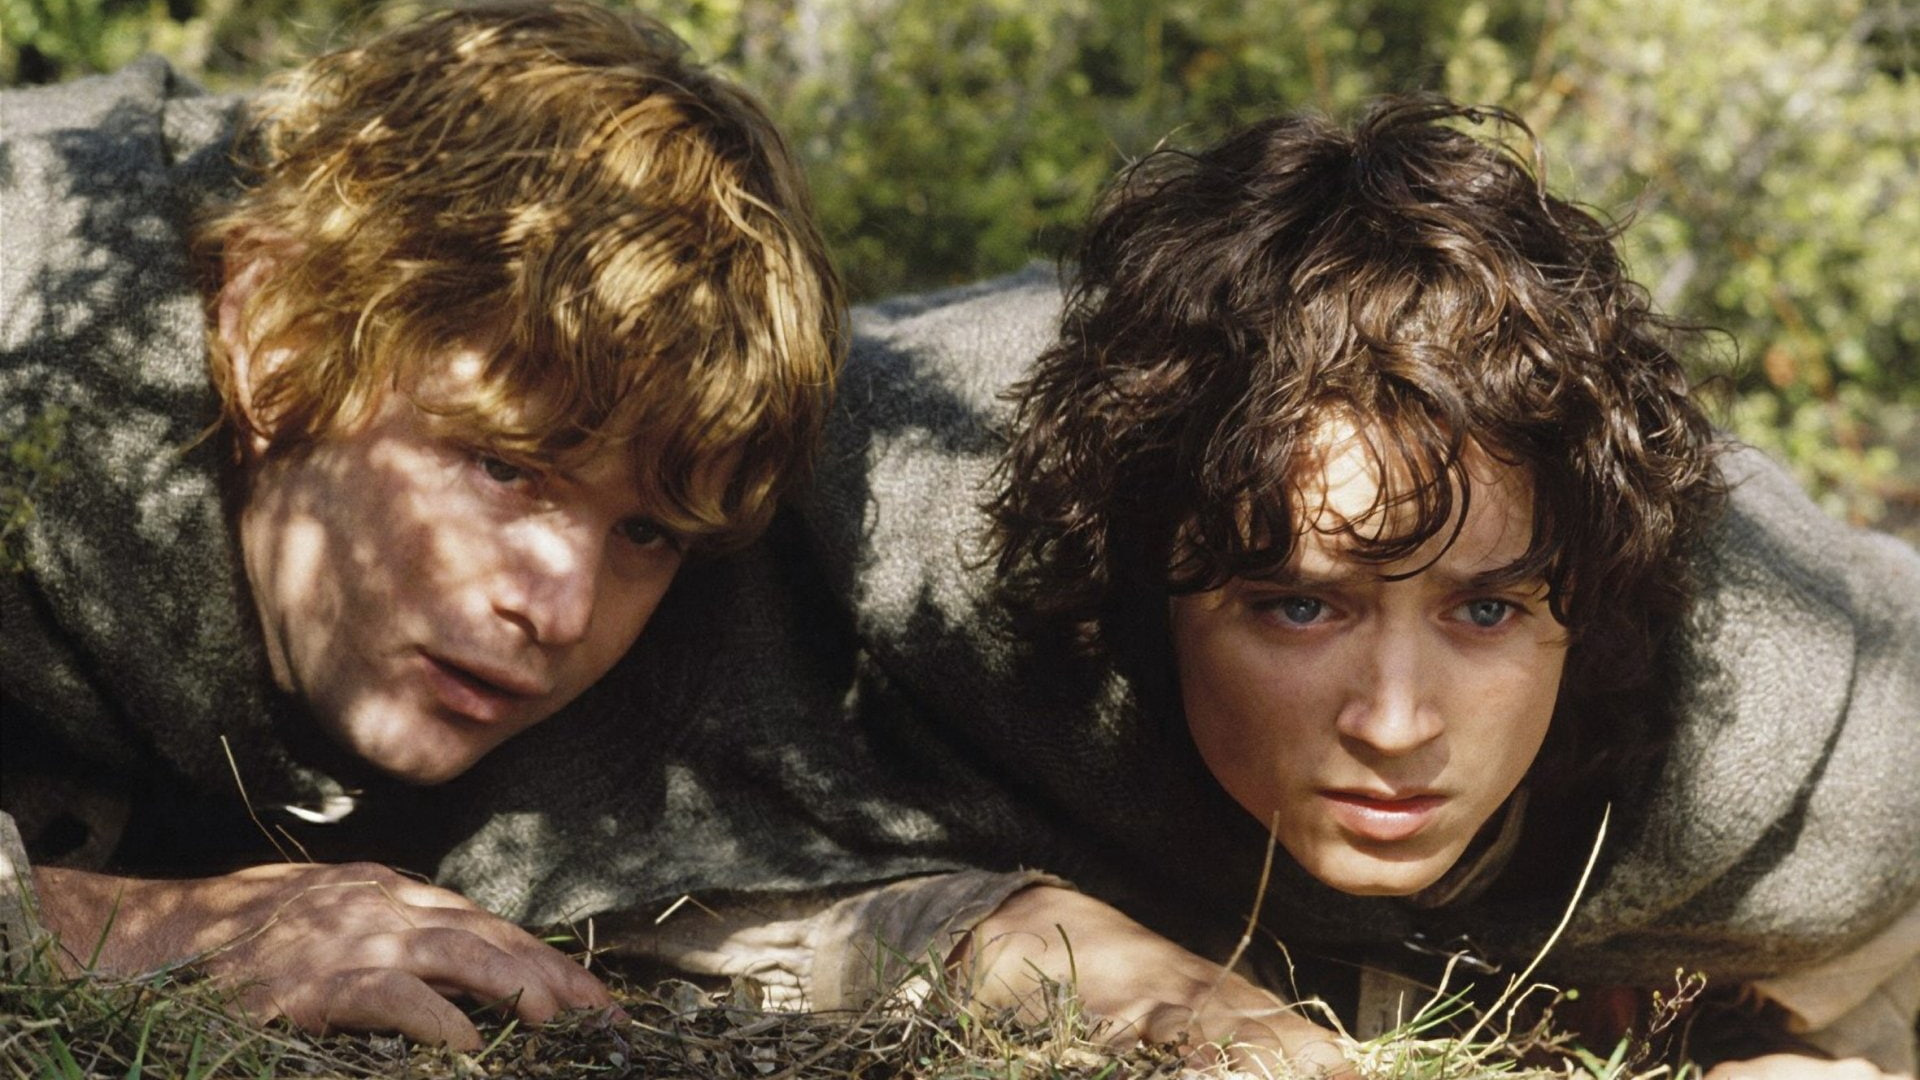 movie, the lord of the rings: the two towers, elijah wood, frodo baggins, lord of the rings, samwise gamgee